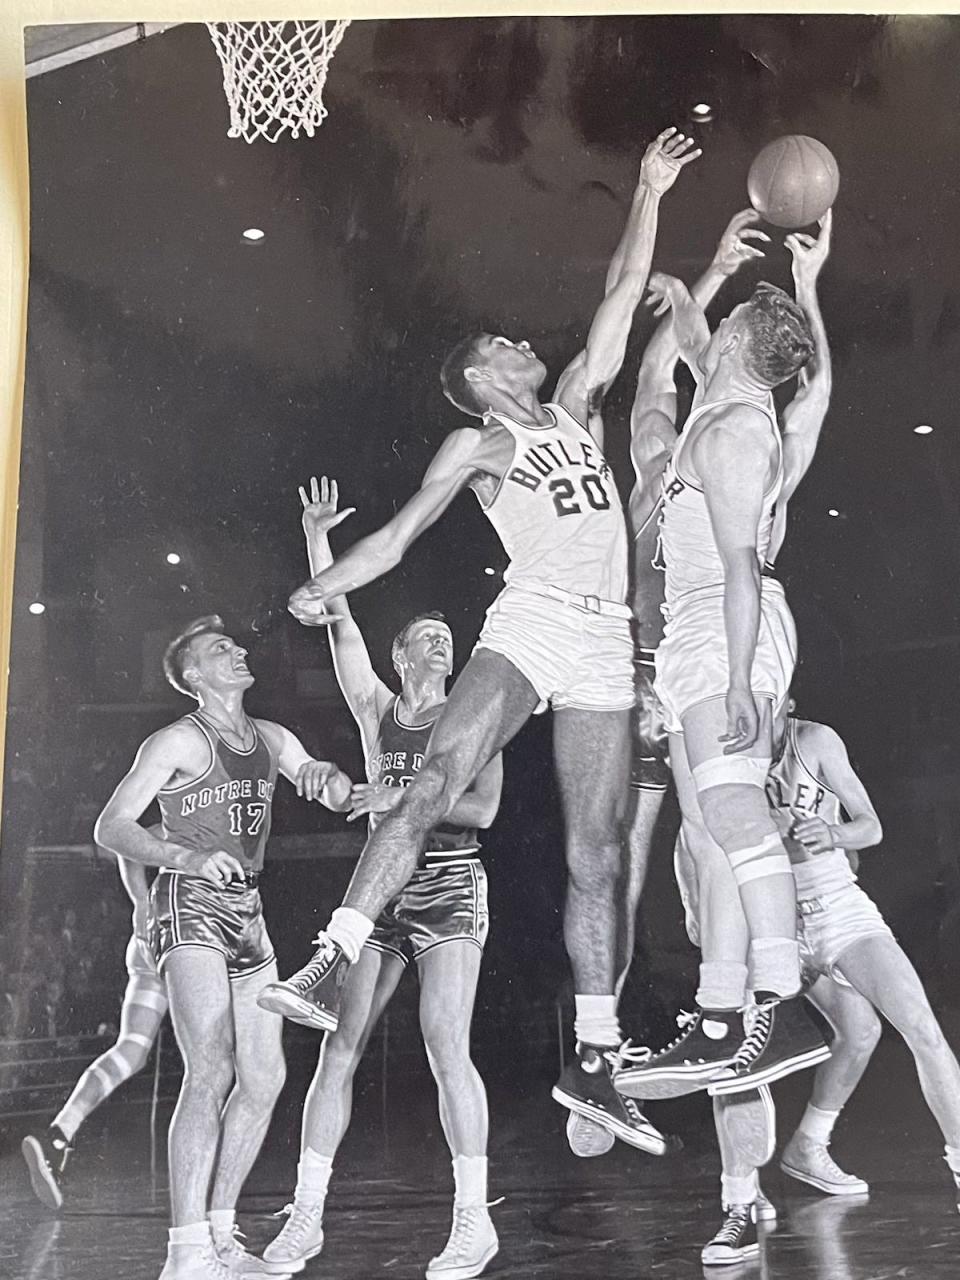 Hank Foster attempts to block a shot against Notre Dame in the mid-1950s. Foster was the first Black basketball player at Butler.